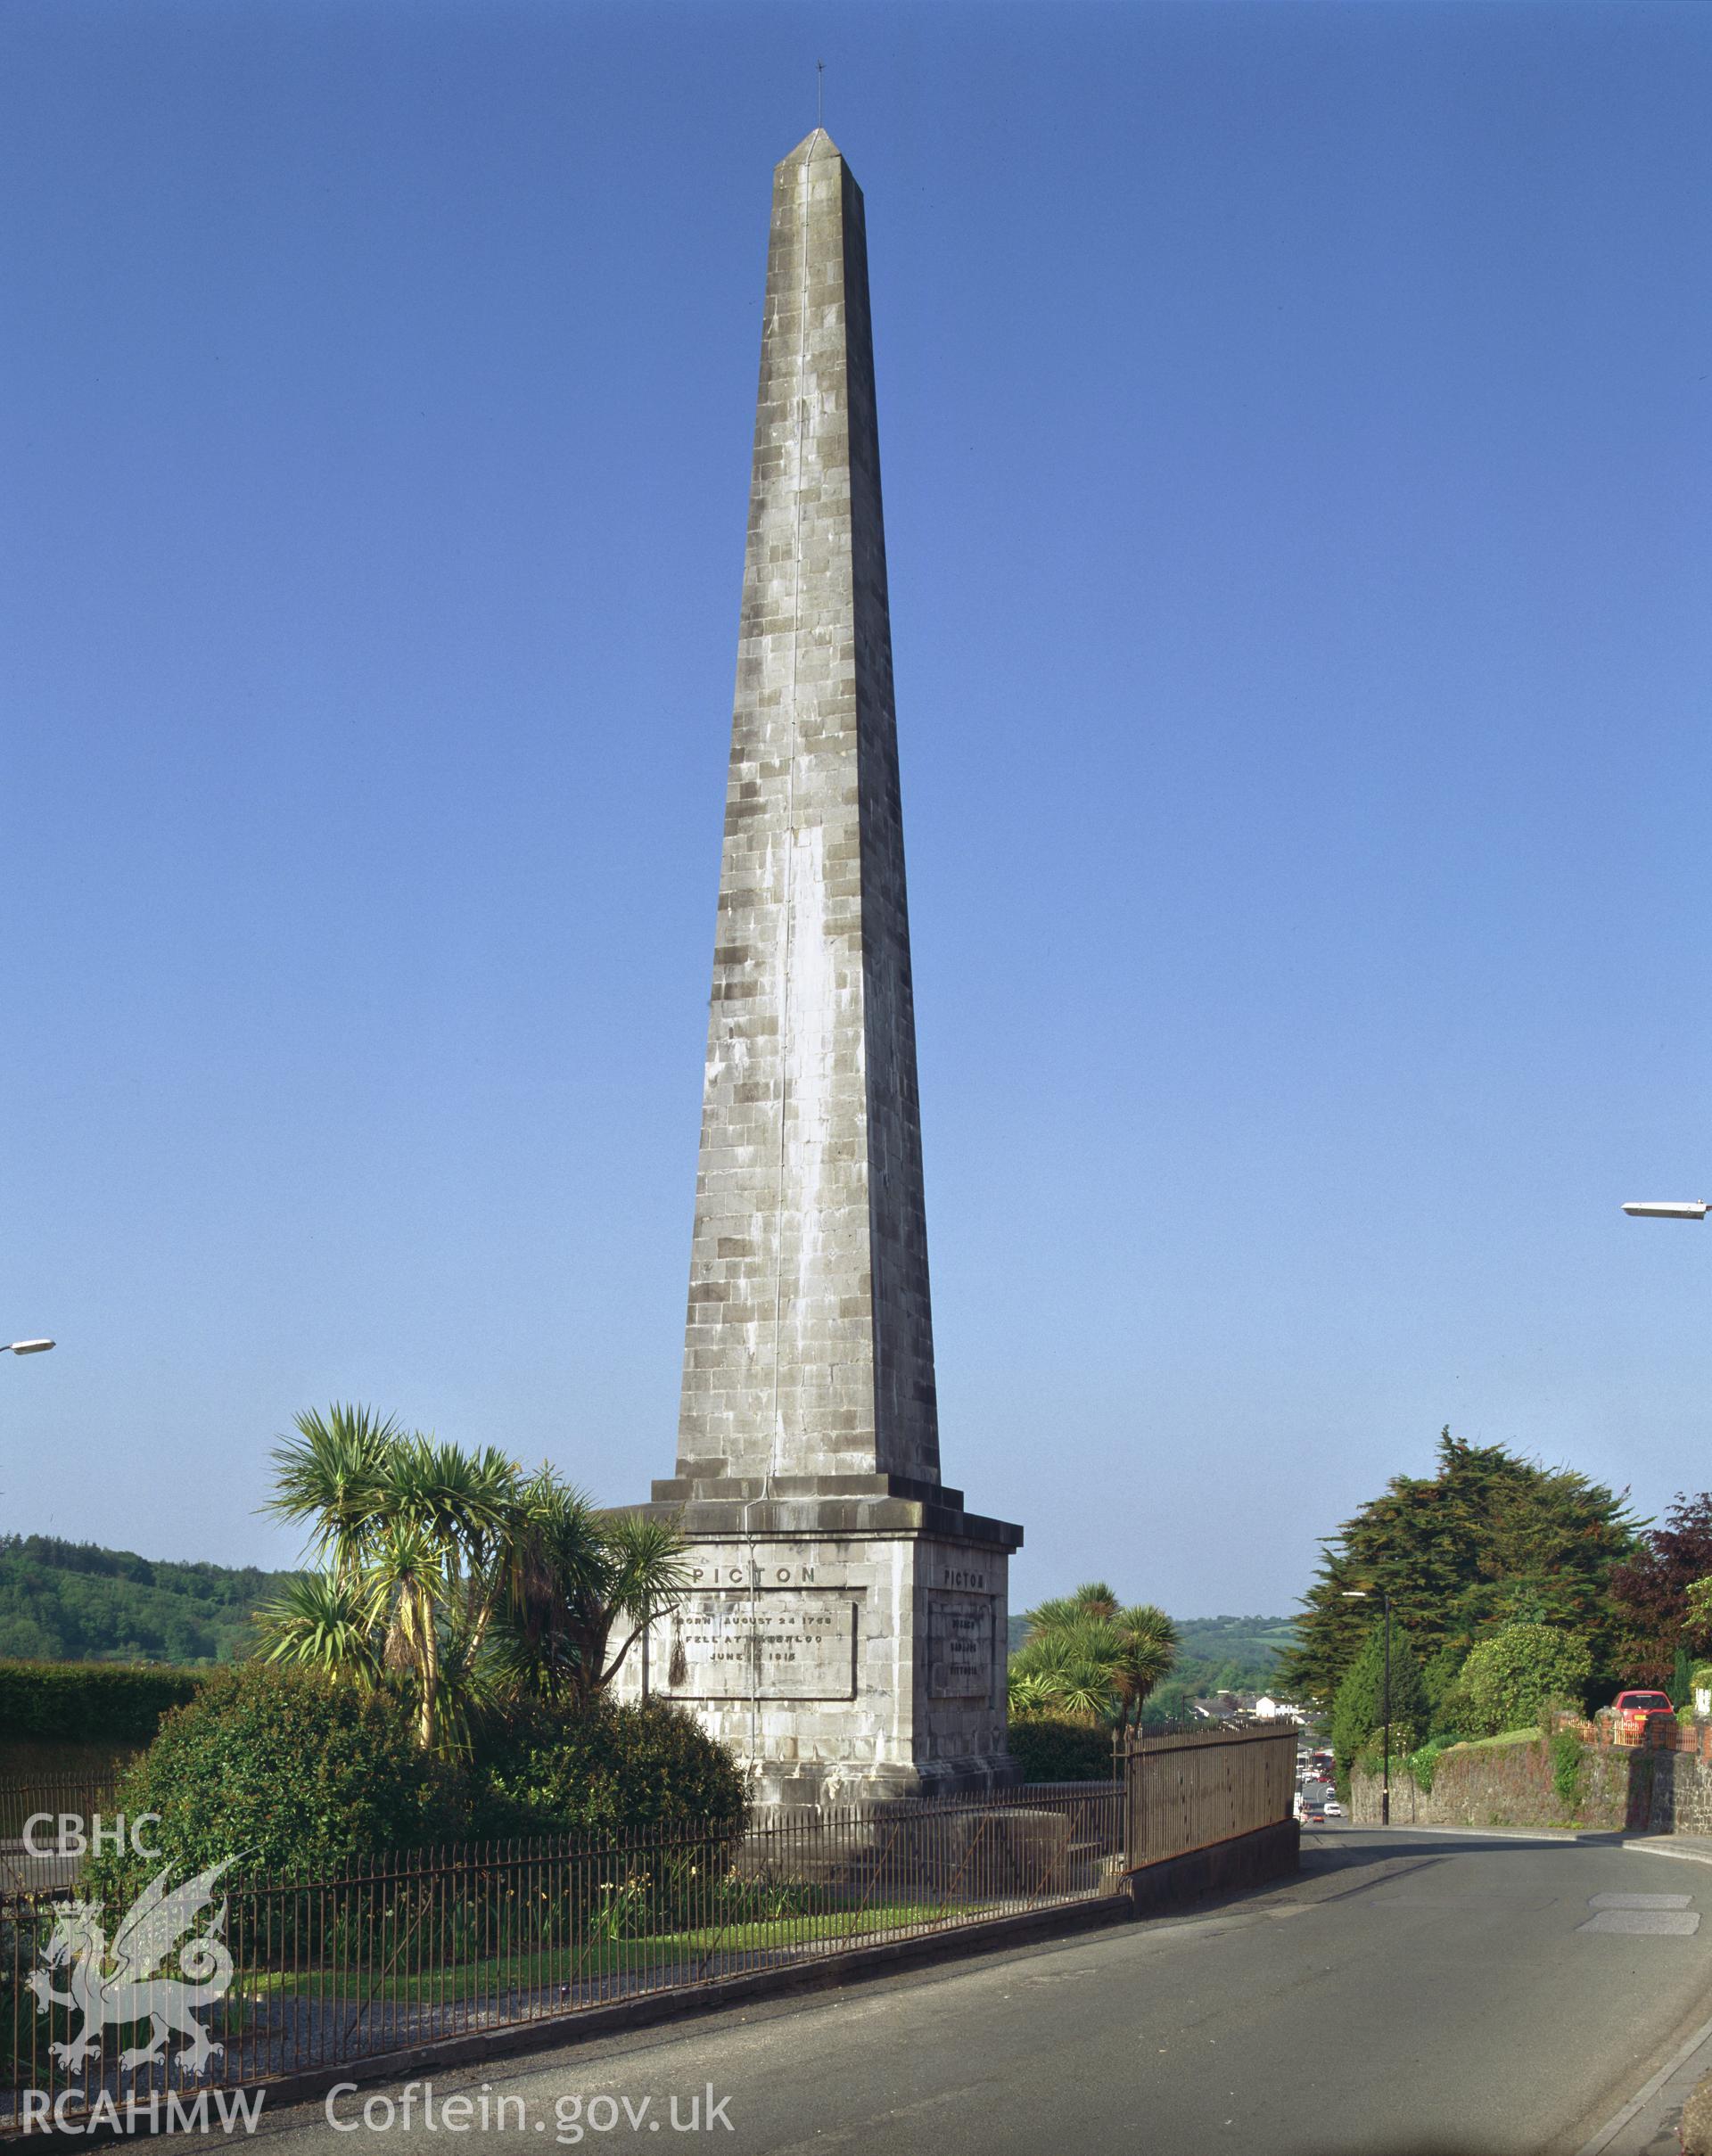 Colour transparency showing Picton Memorial, Carmarthen, produced by Iain Wright, June 2004.